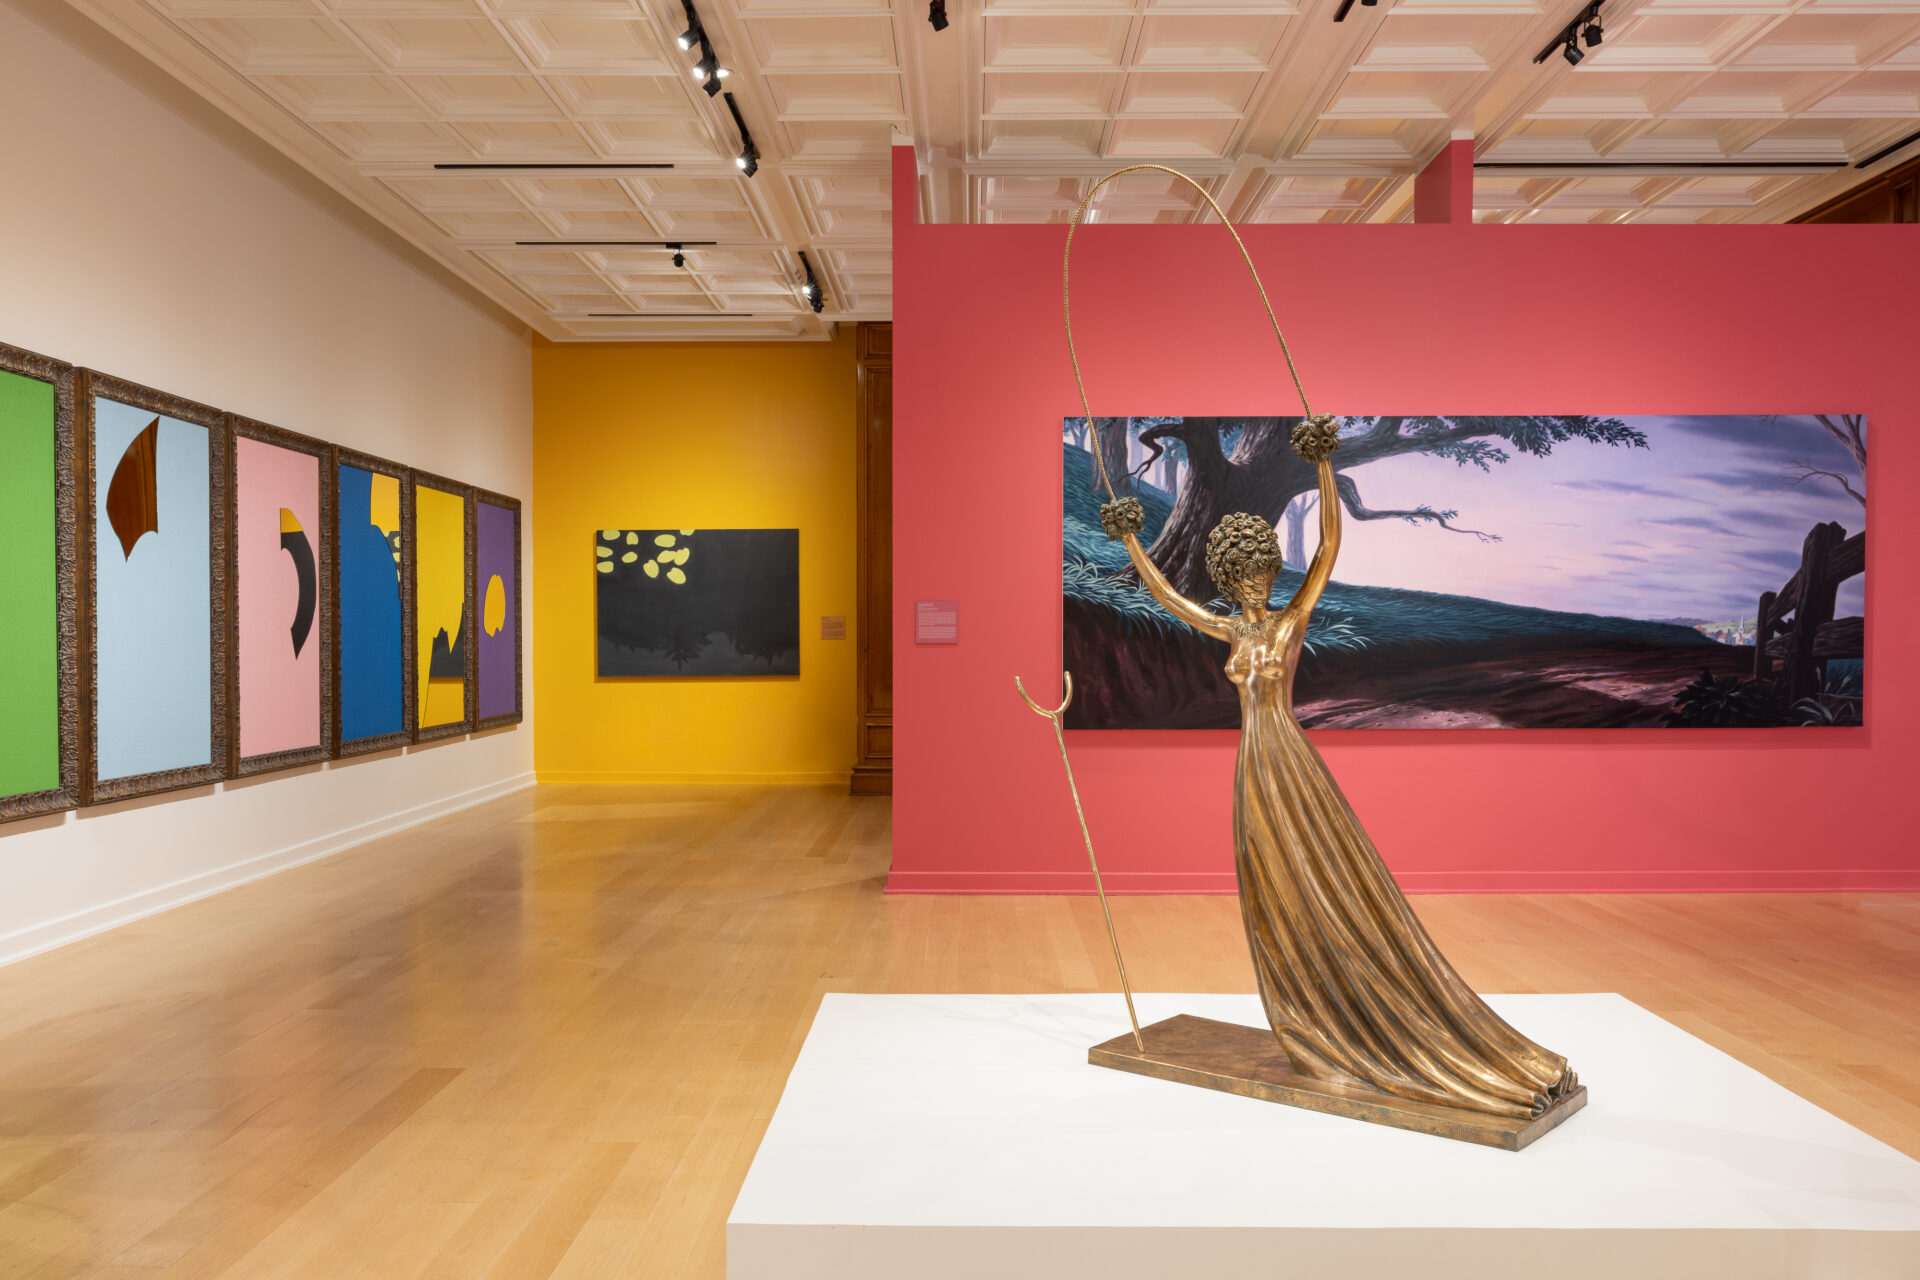 Installation View of Salvador Dalí, Colen, Katz, and Pistoletto —courtesy Bellagio Gallery of Fine Art. Photo: Jenks Imaging